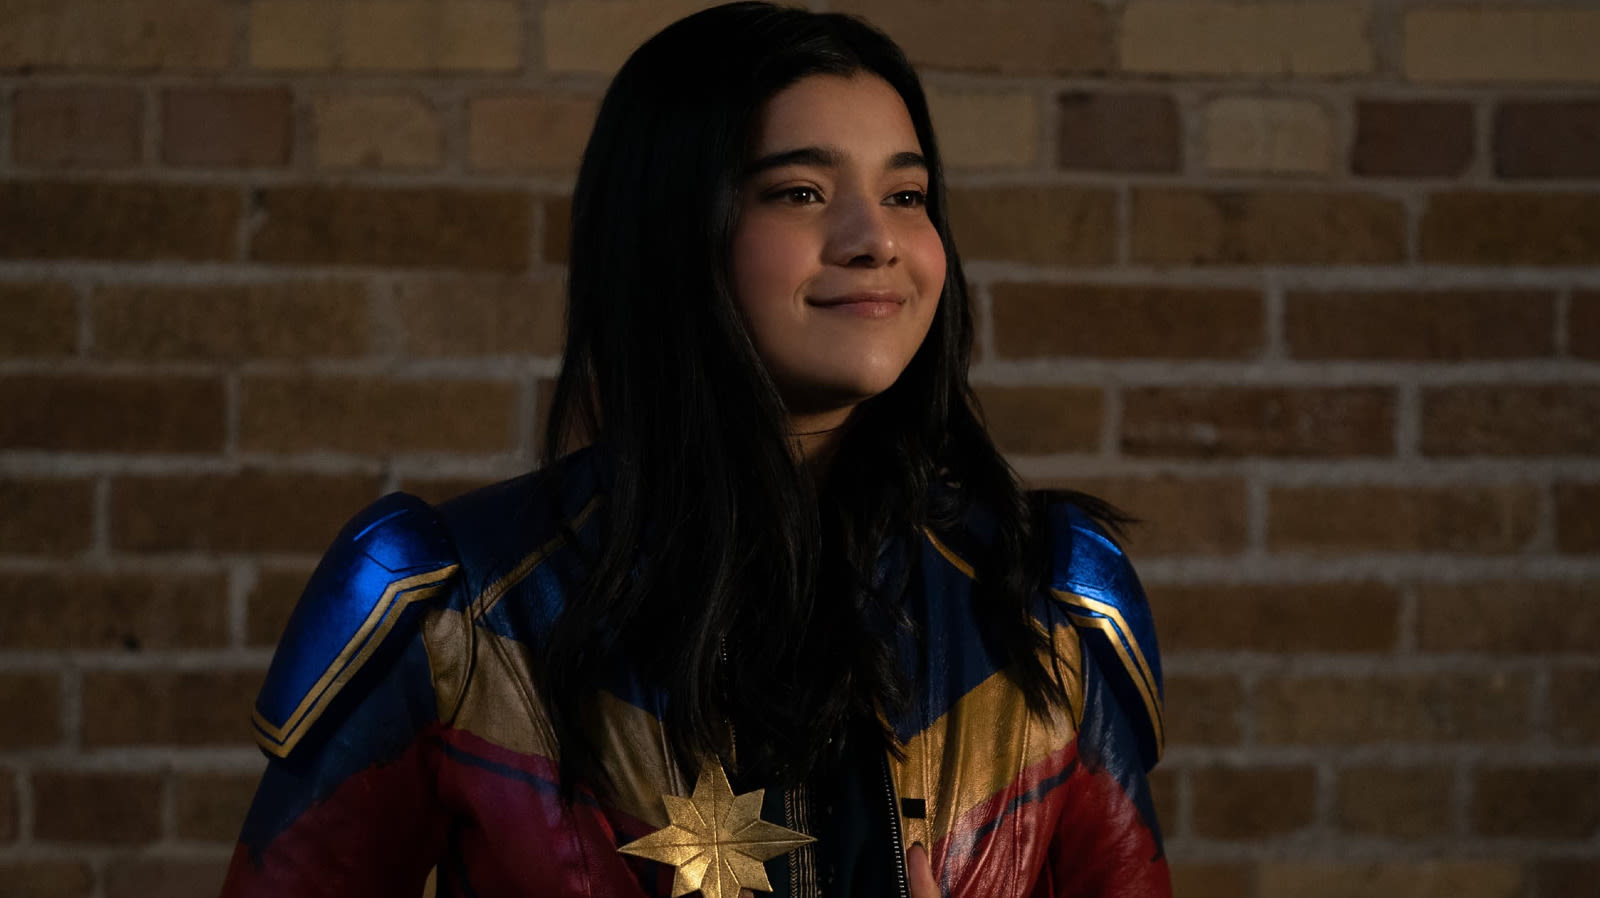 The Ms. Marvel Scene Iman Vellani Couldn't Get Through Without Laughing - SlashFilm